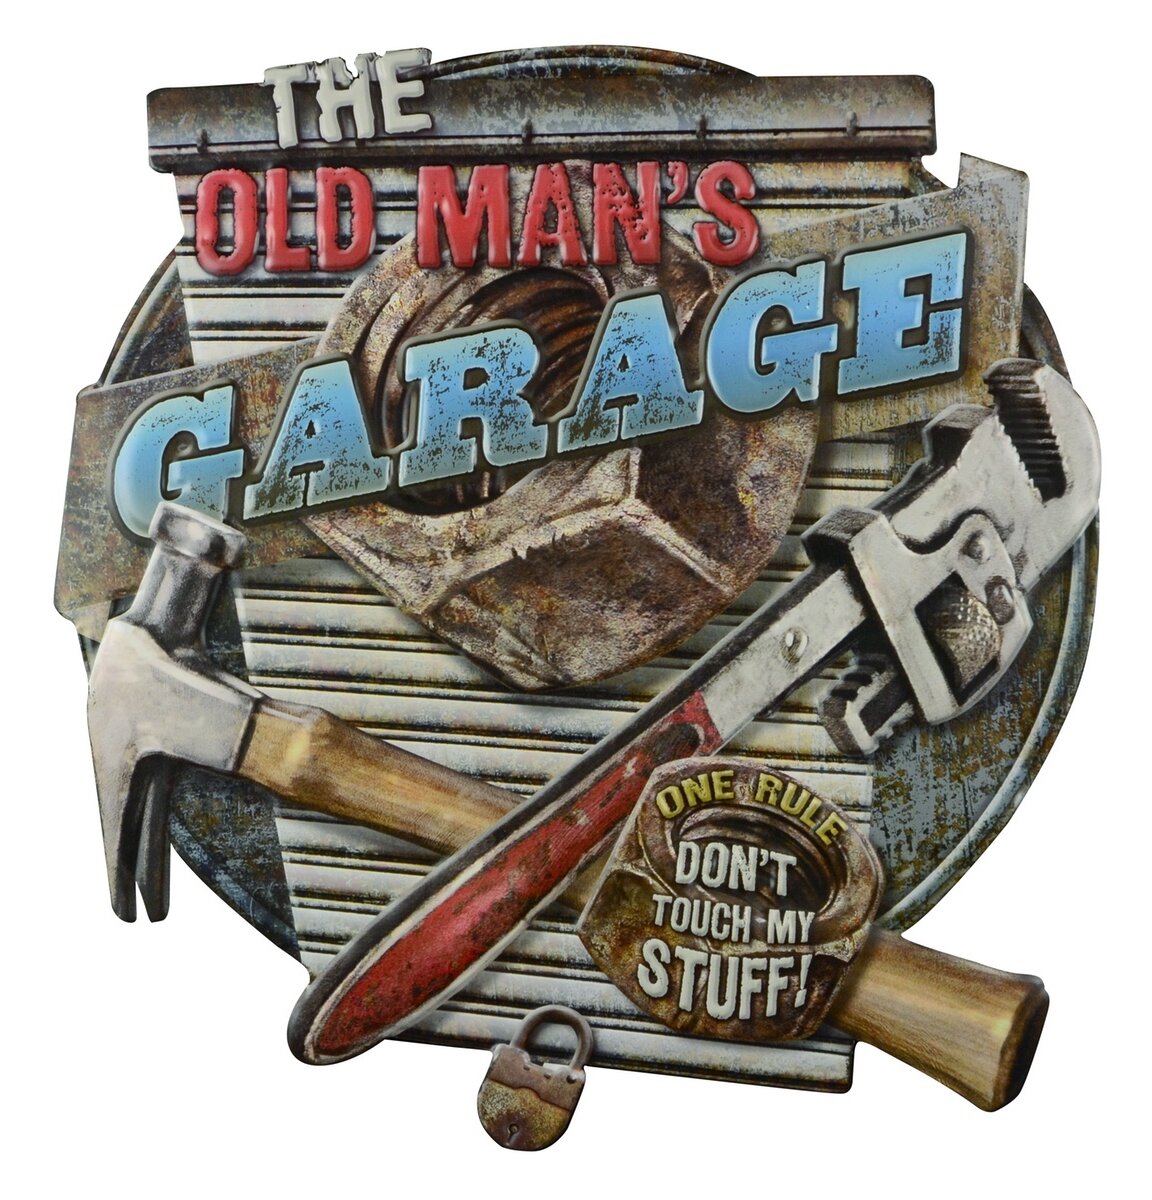 PPWG0438 WELCOME HUGO'S GARAGE Tool Rules Chic Sign man cave decor Funny Gift